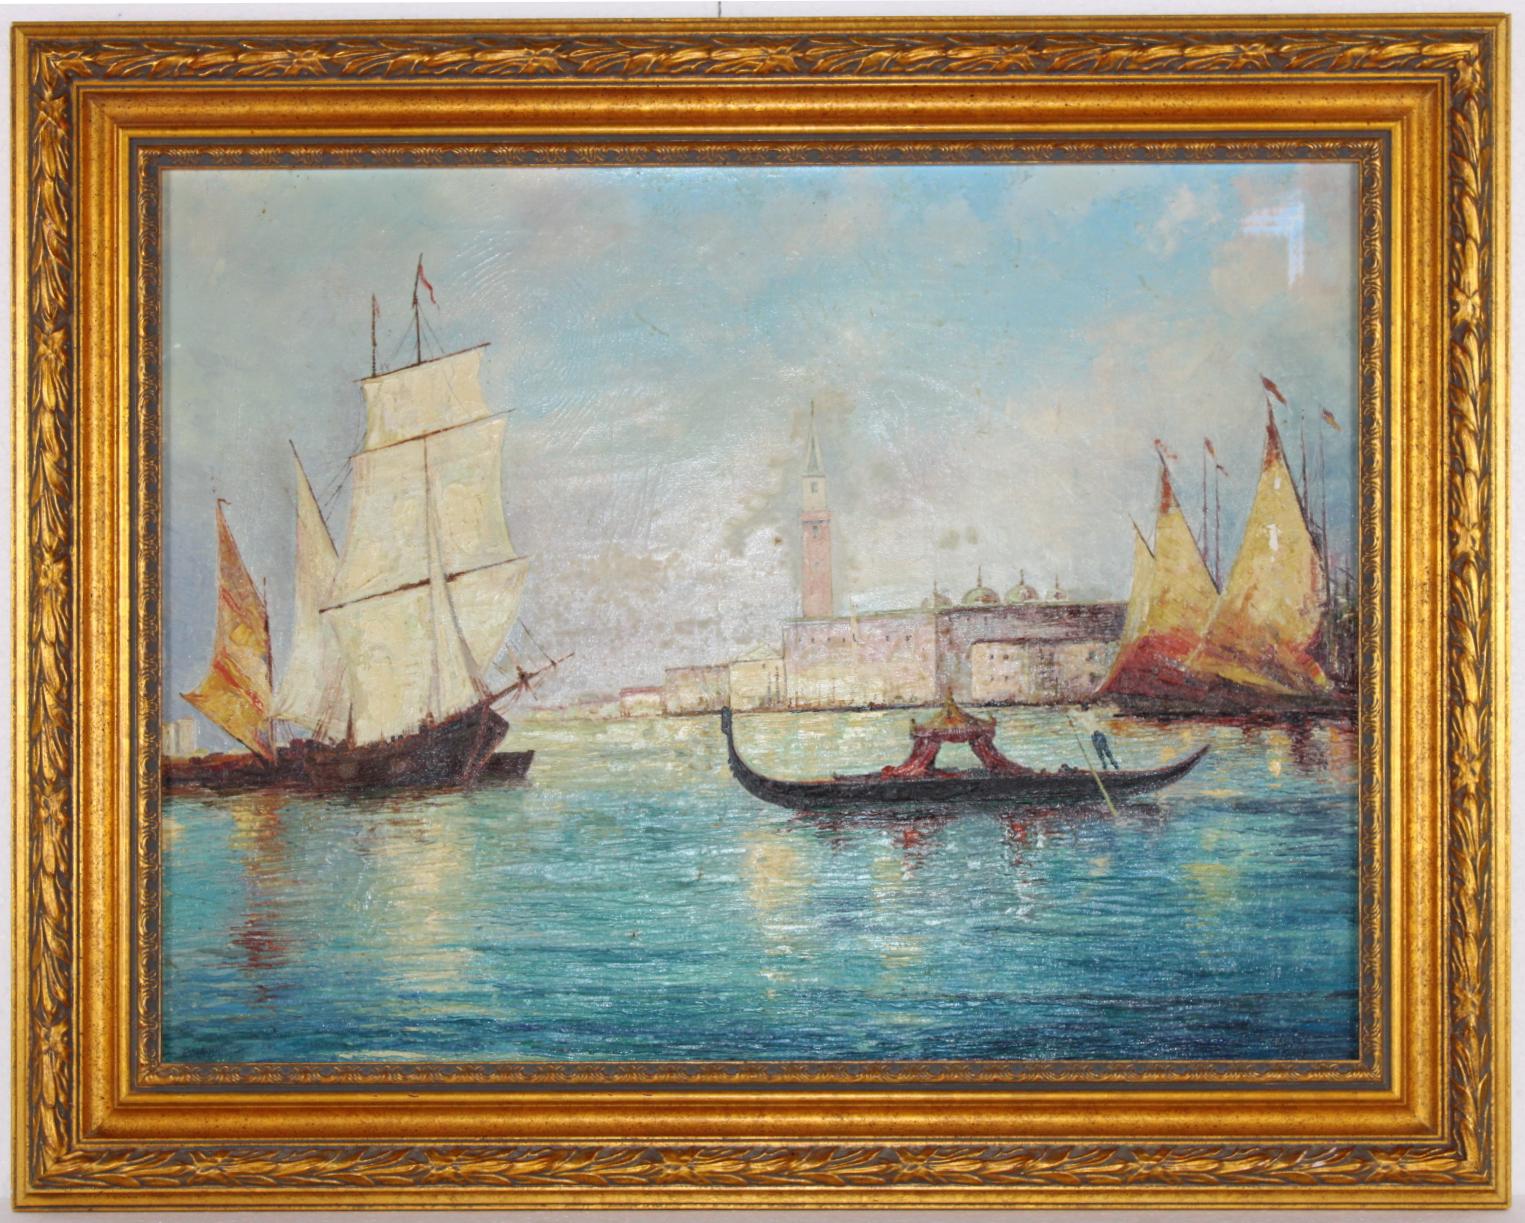 Unknown Figurative Painting - View of Venice, Original Antique Oil on Canvas, Impressionist, Large, Signed